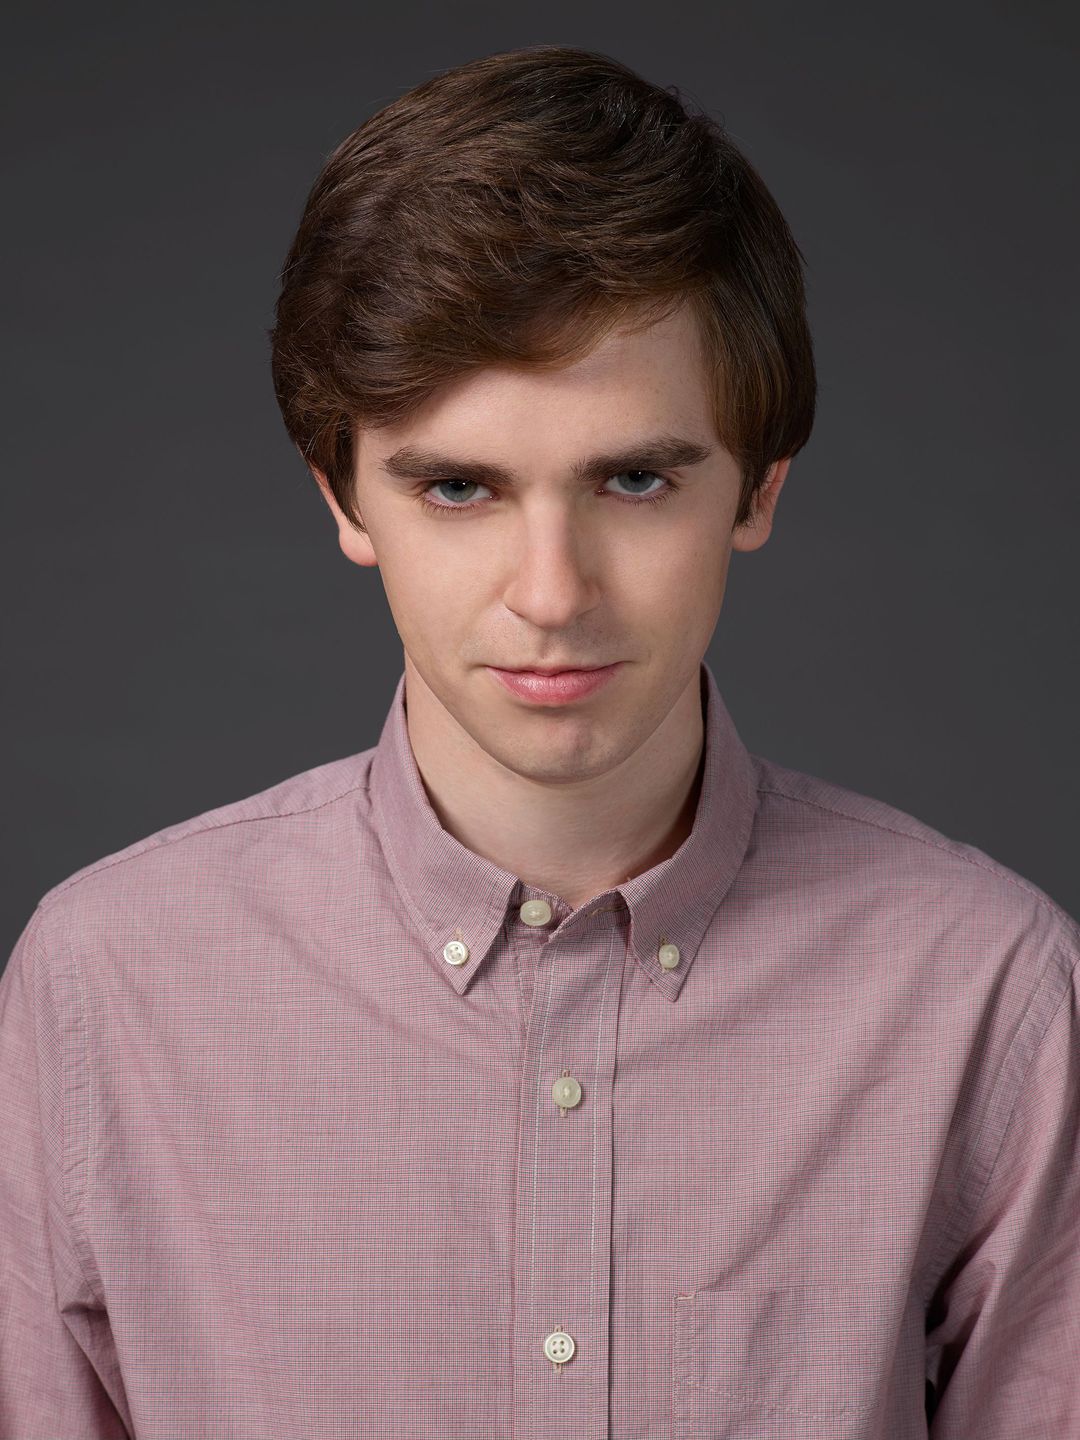 Freddie Highmore height and weight